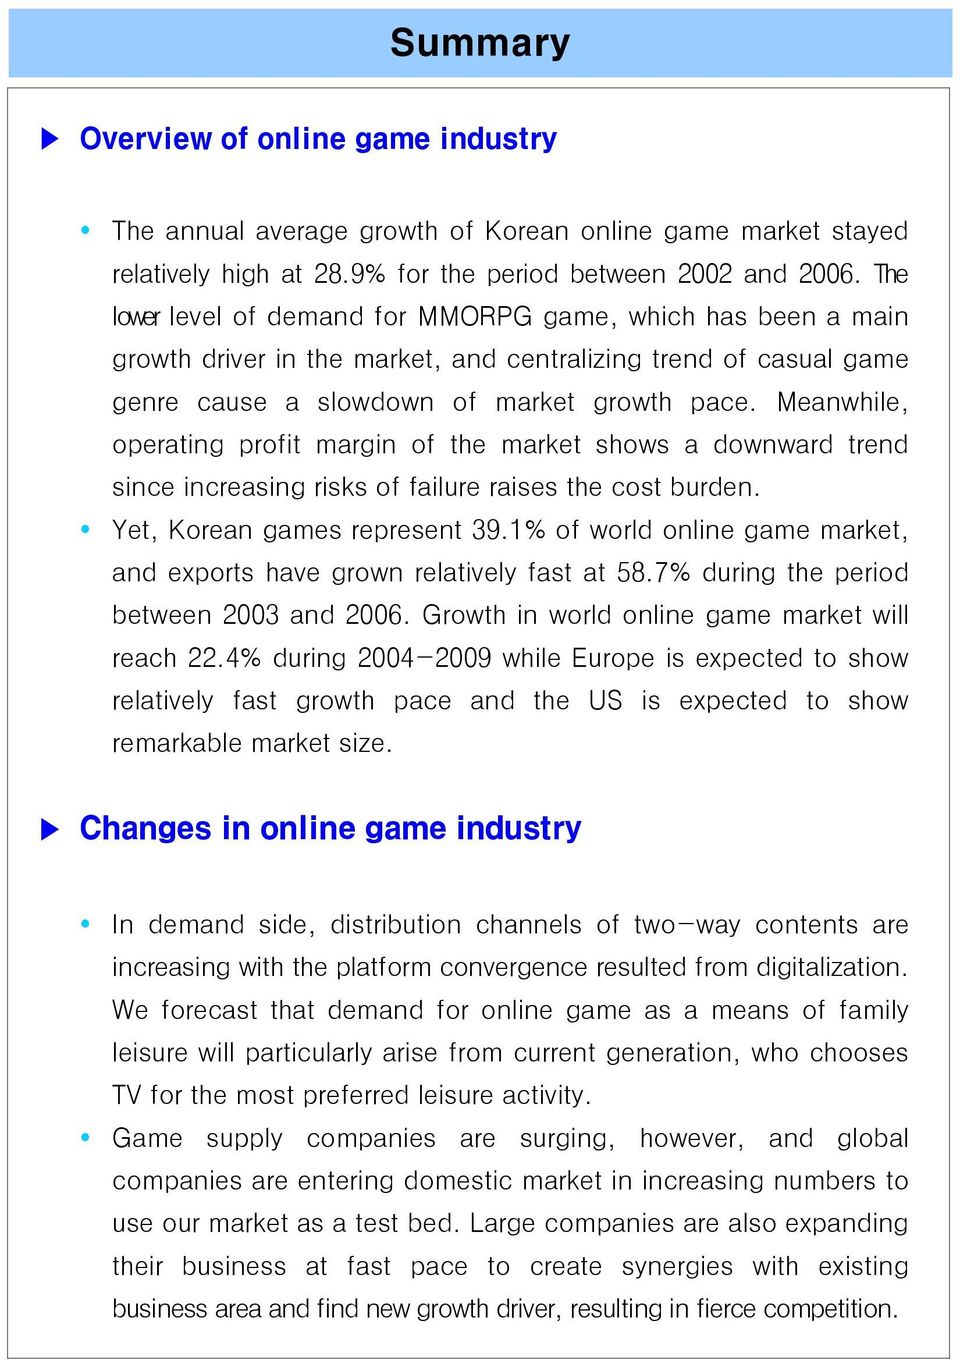 Meanwhile, operating profit margin of the market shows a downward trend since increasing risks of failure raises the cost burden. Yet, Korean games represent 39.